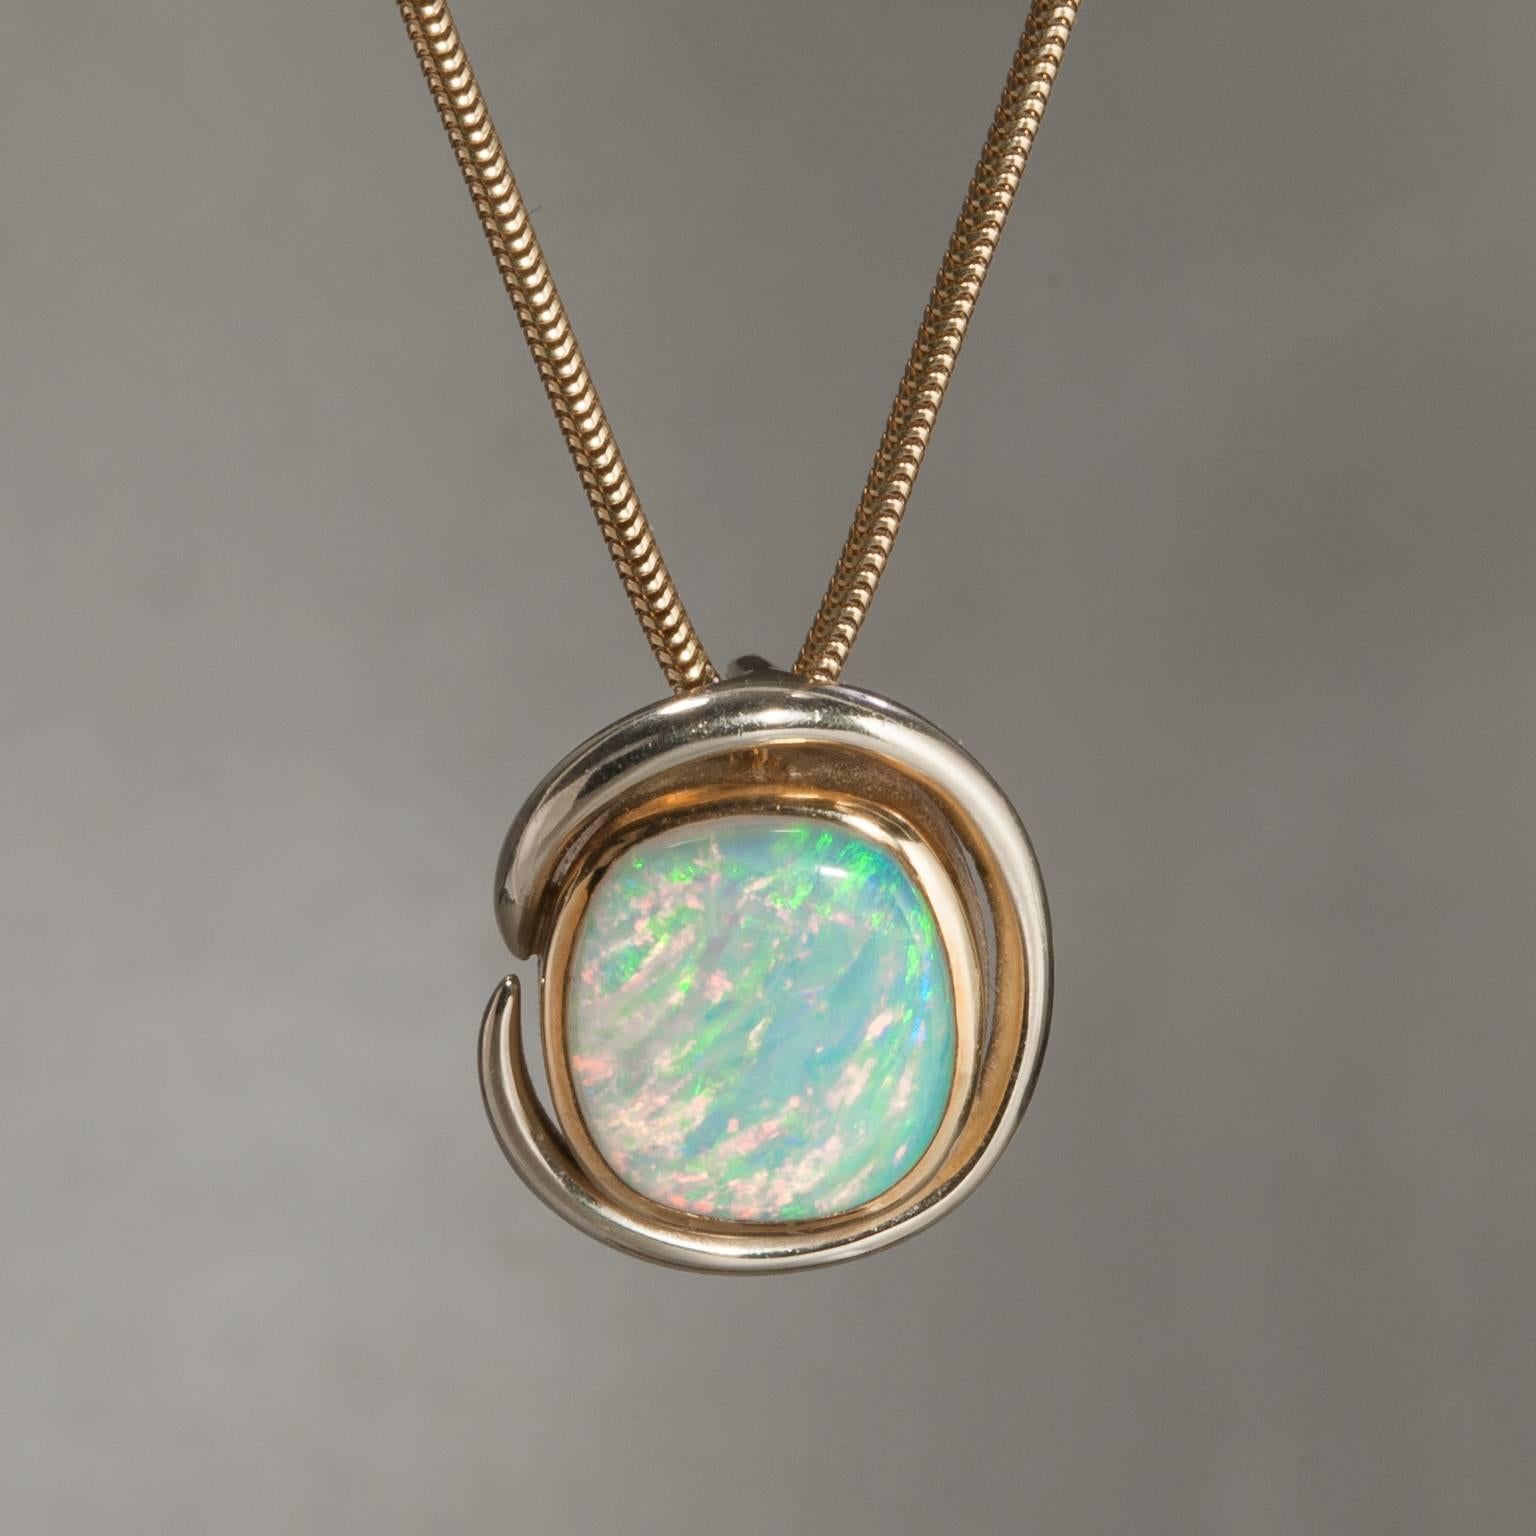 1970s 5.00 Carat Fire Opal Gold Pendant In Excellent Condition For Sale In Carmel, CA